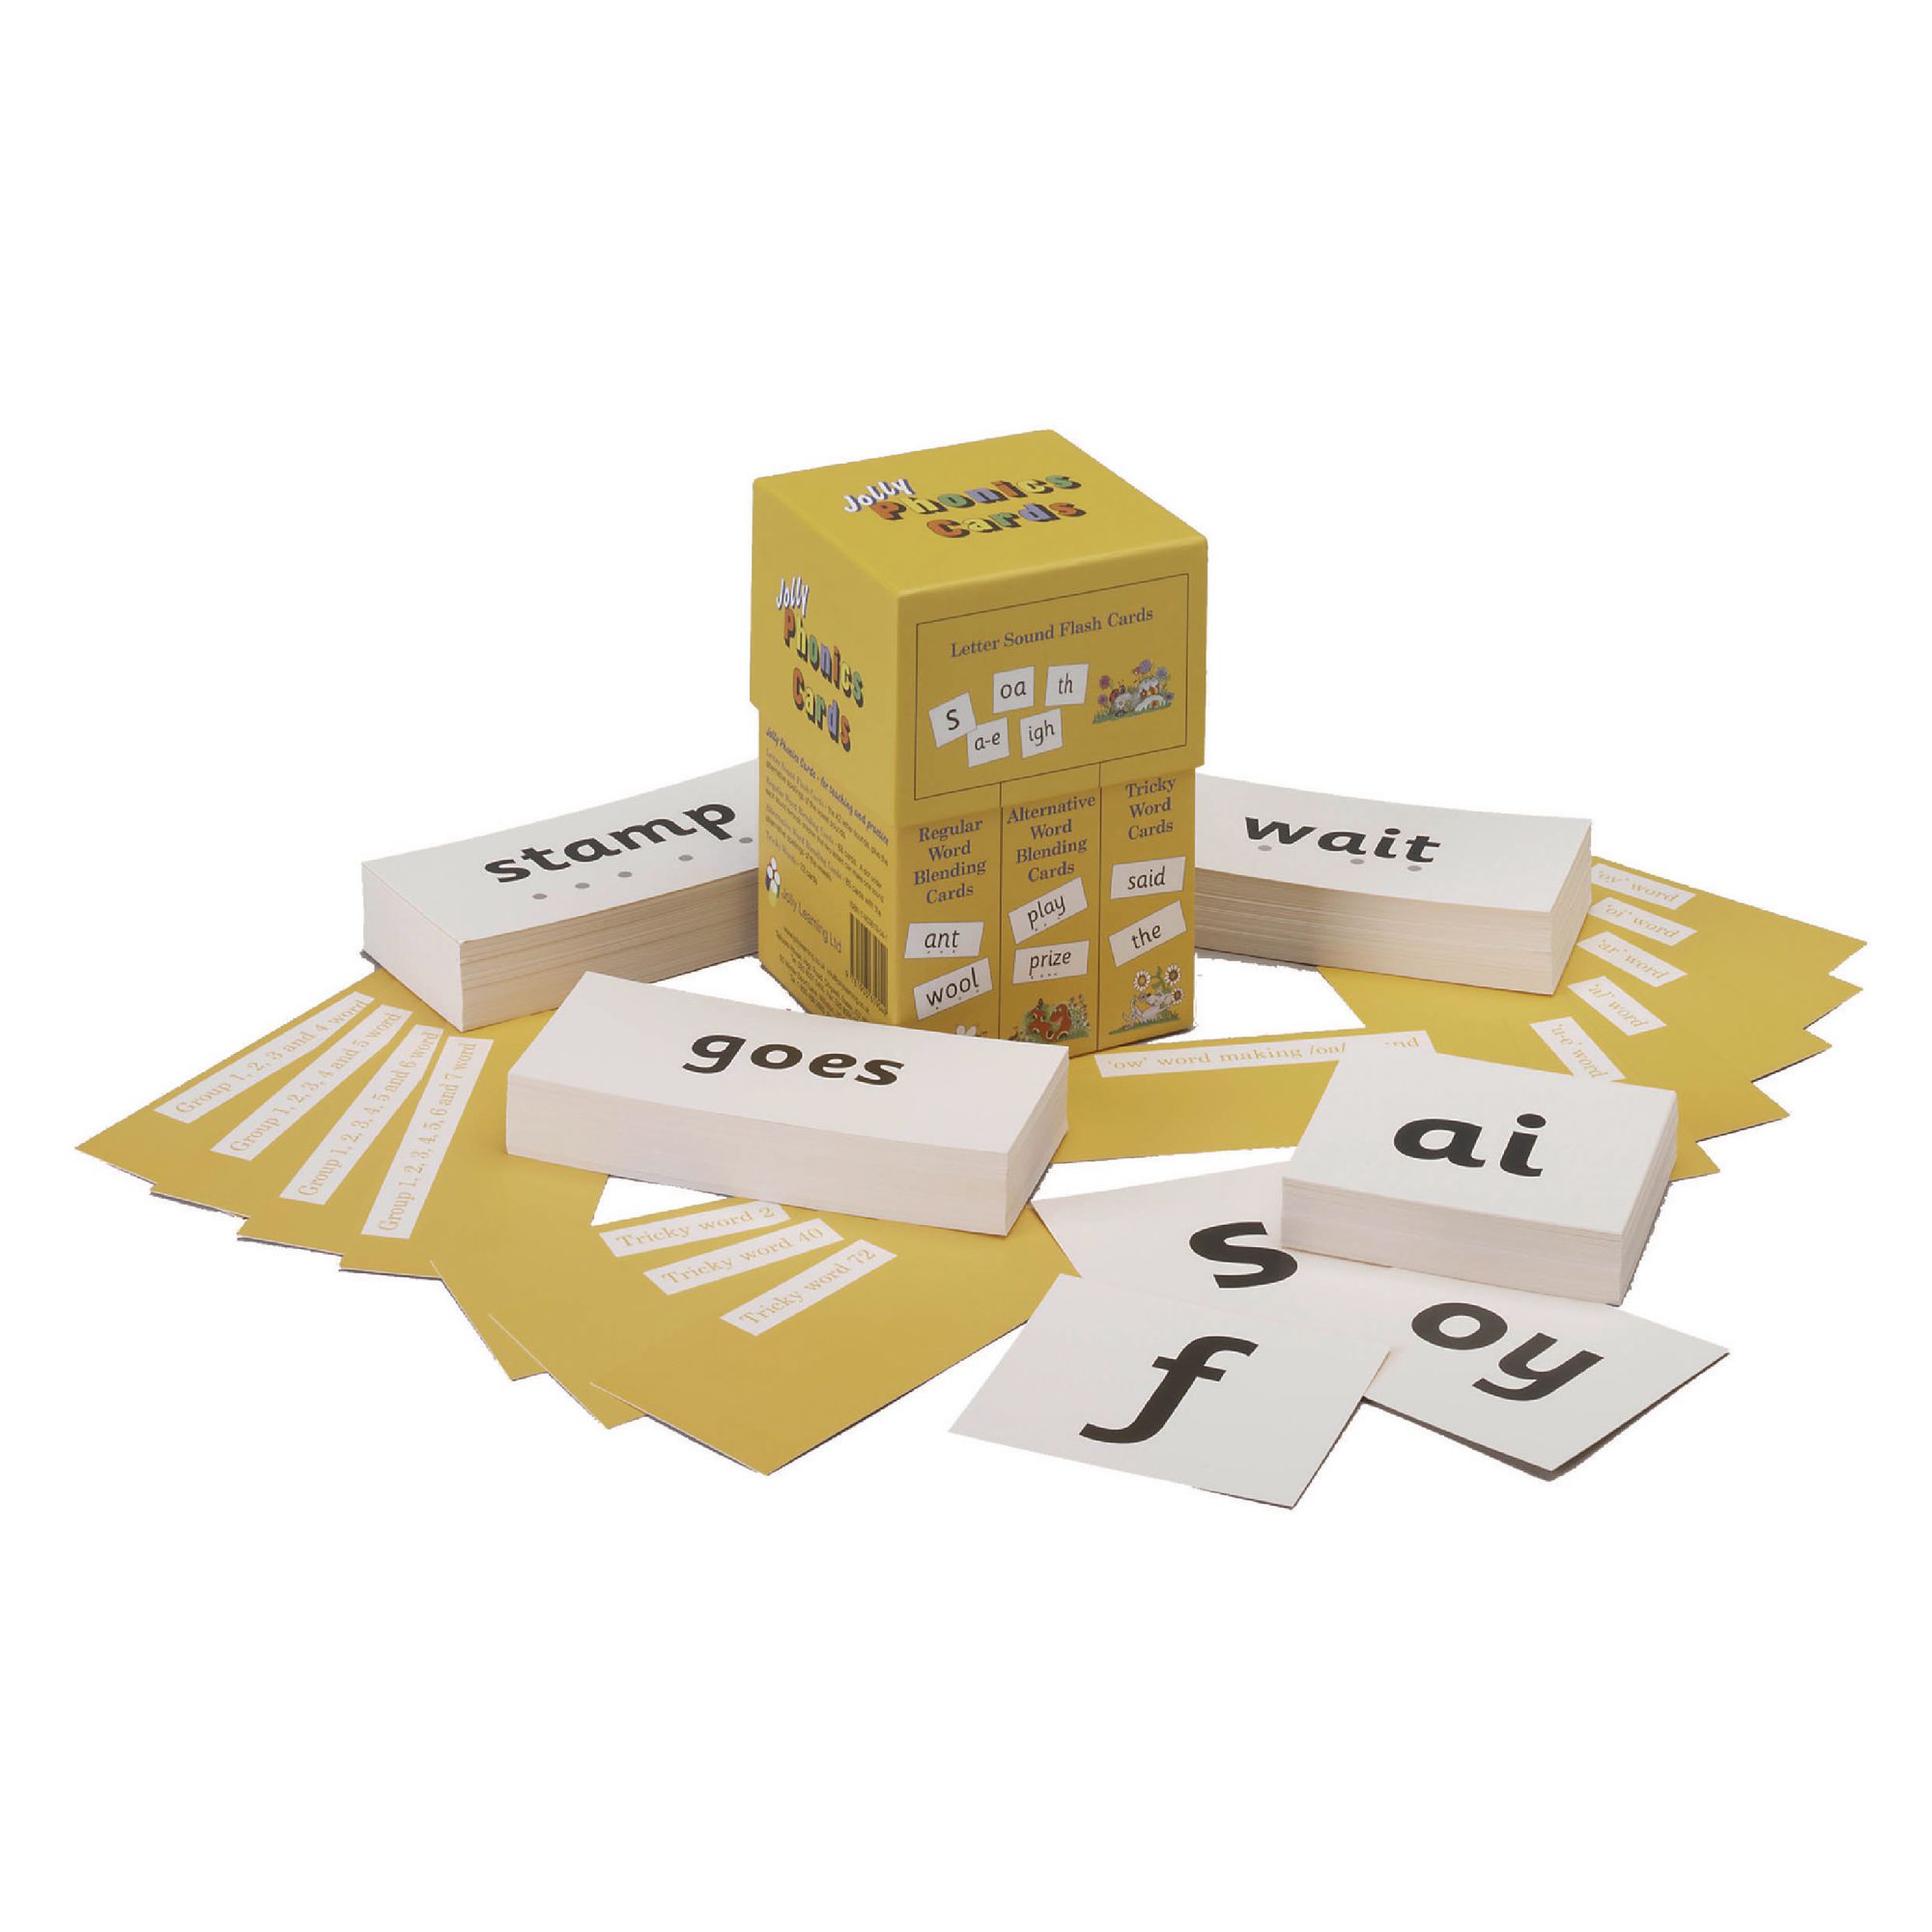 he1004479-jolly-phonics-letter-sound-flash-cards-findel-education